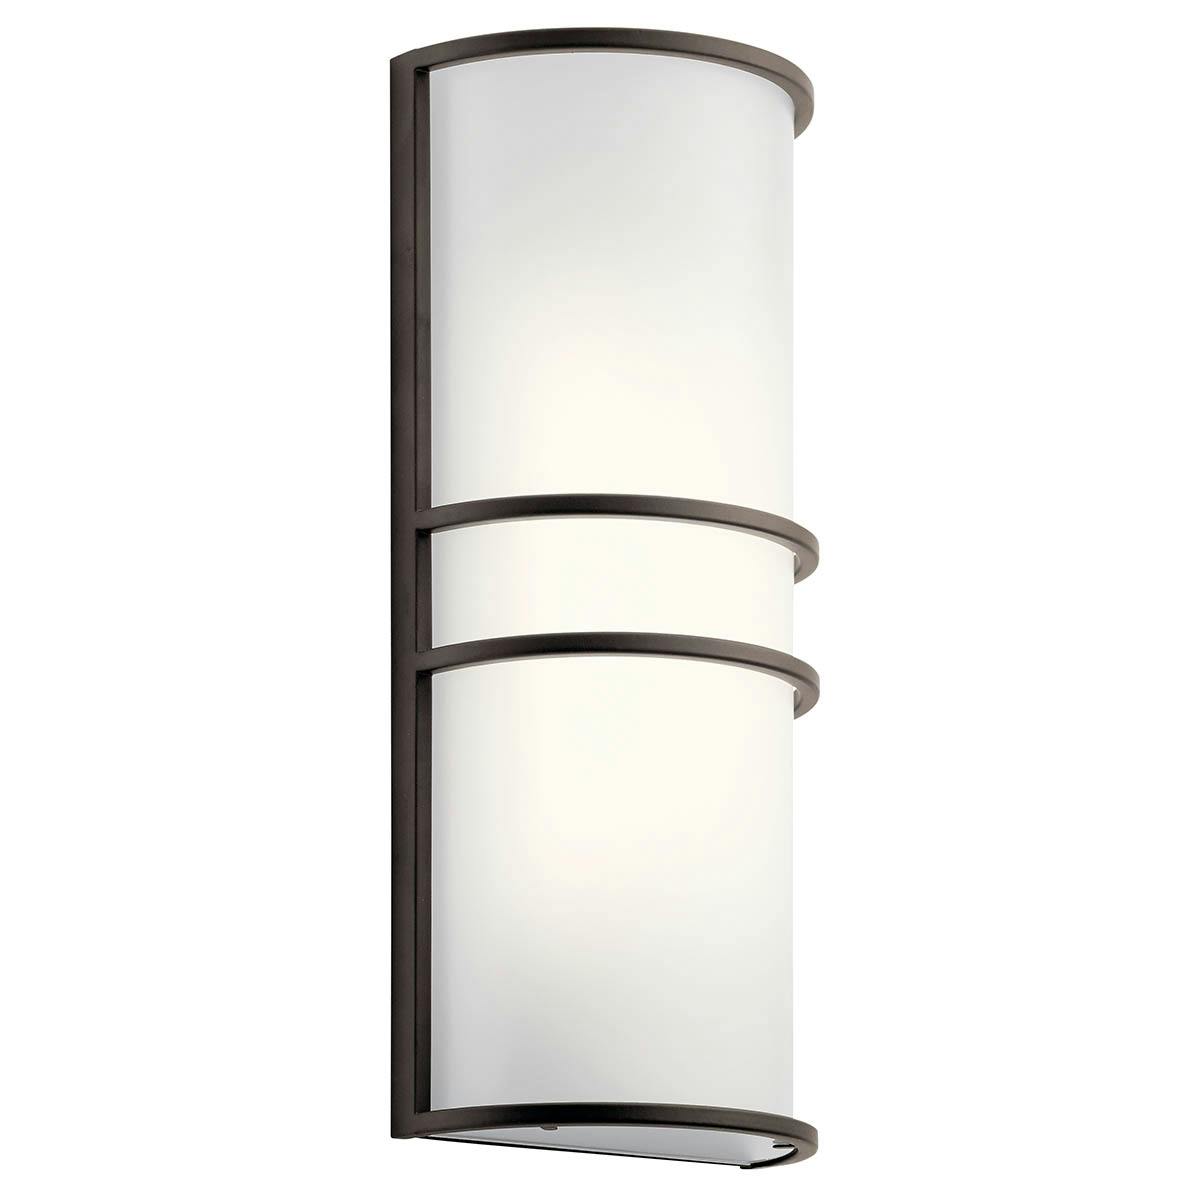 2 Light LED Wall Sconce Olde Bronze® on a white background